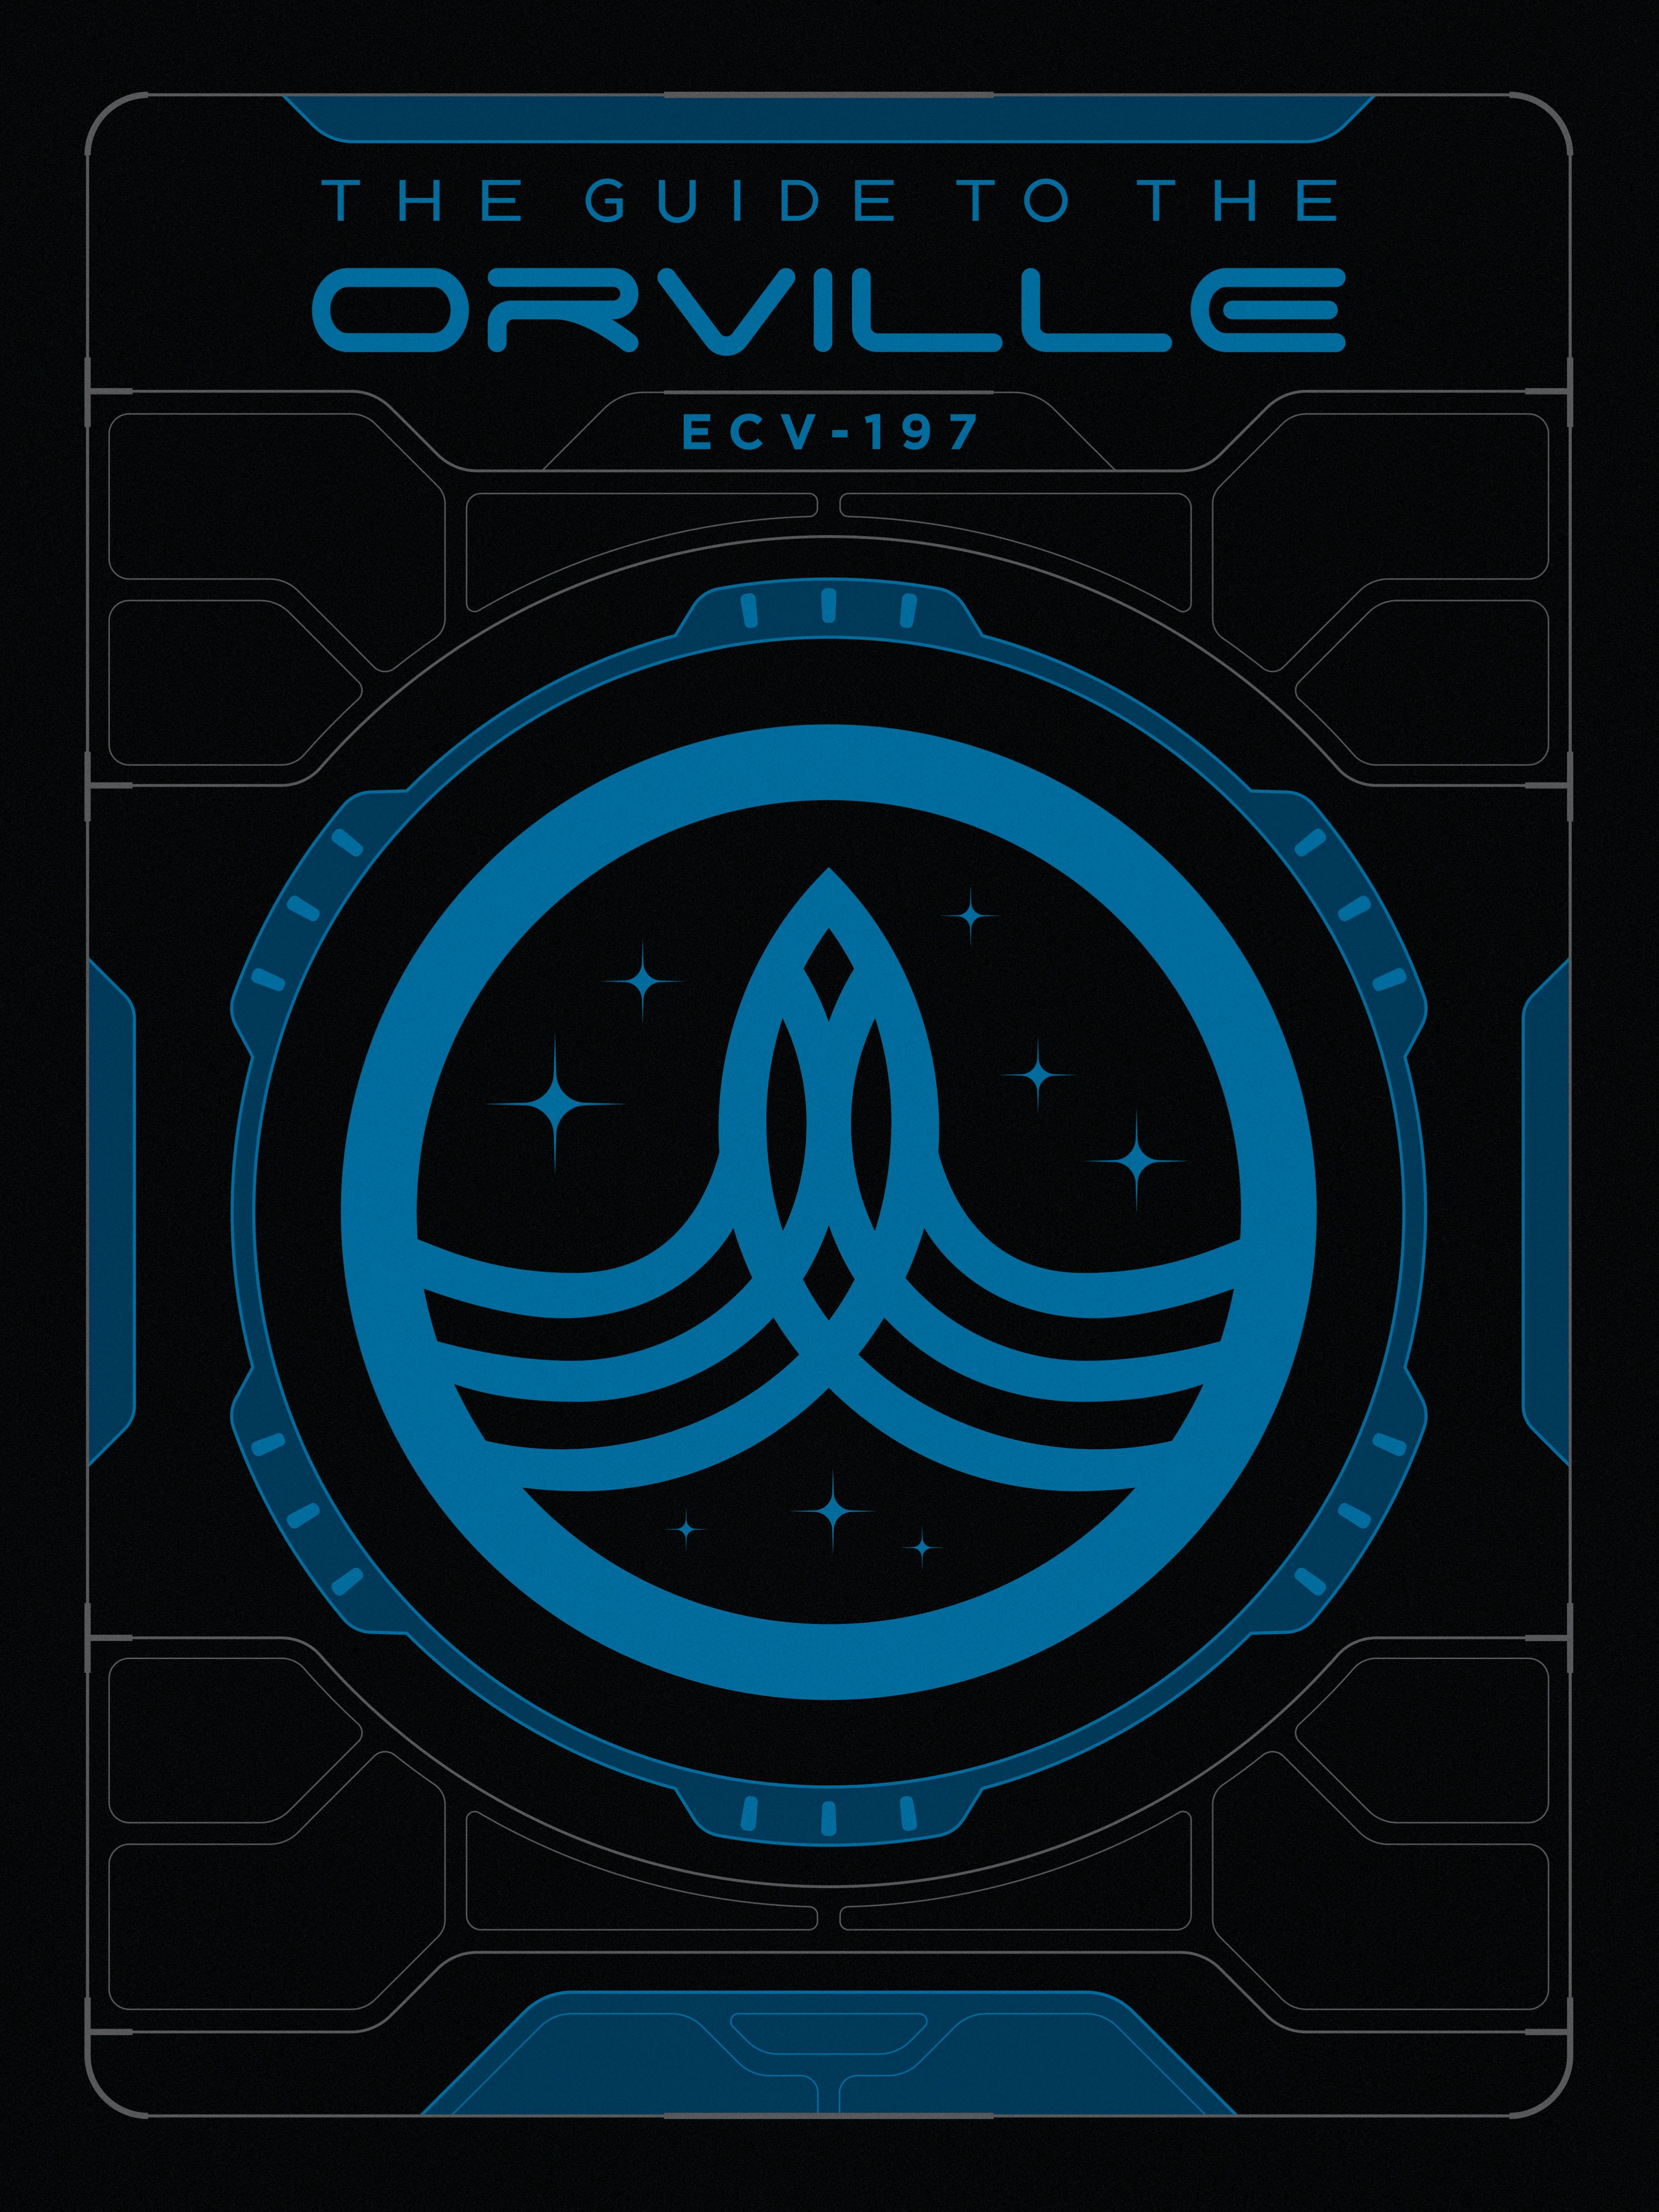 The Orville Gets Perfect Companion Guide Fans Have Been Waiting For (Exclusive)